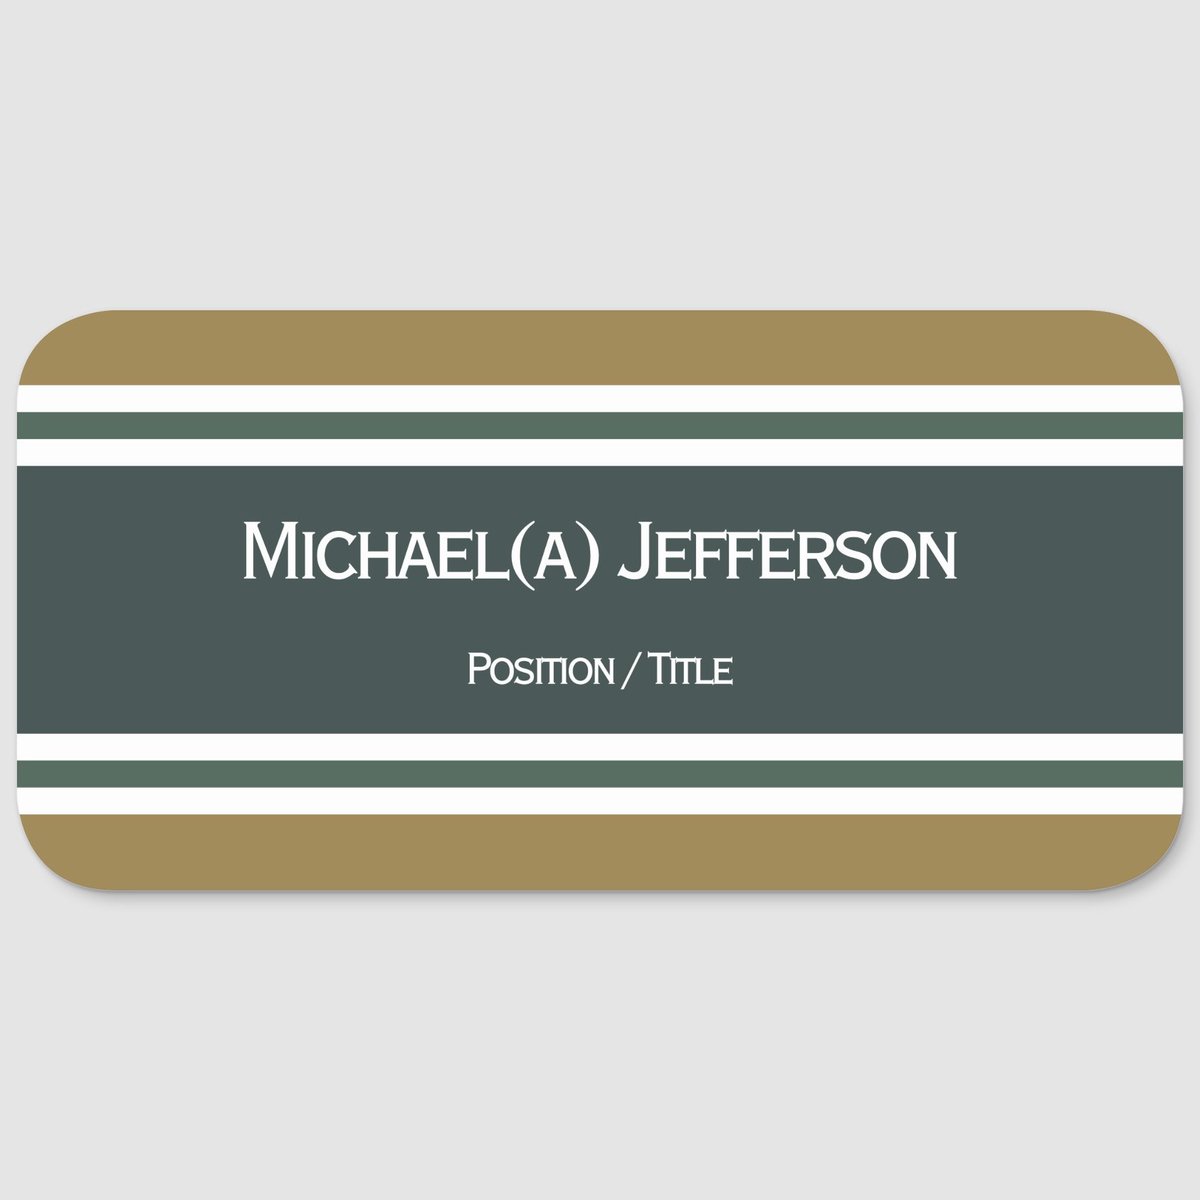 The line between modern minimalism and timeless elegance zazzle.com/hunter_green_g… Hunter Green #nametag can be a #Personalizedgift for #corporate #employees #Professional #identity for every team #nametags Give a #corporategift #zazzlemade #zazzle #BusinessMan #BusinessSolutions